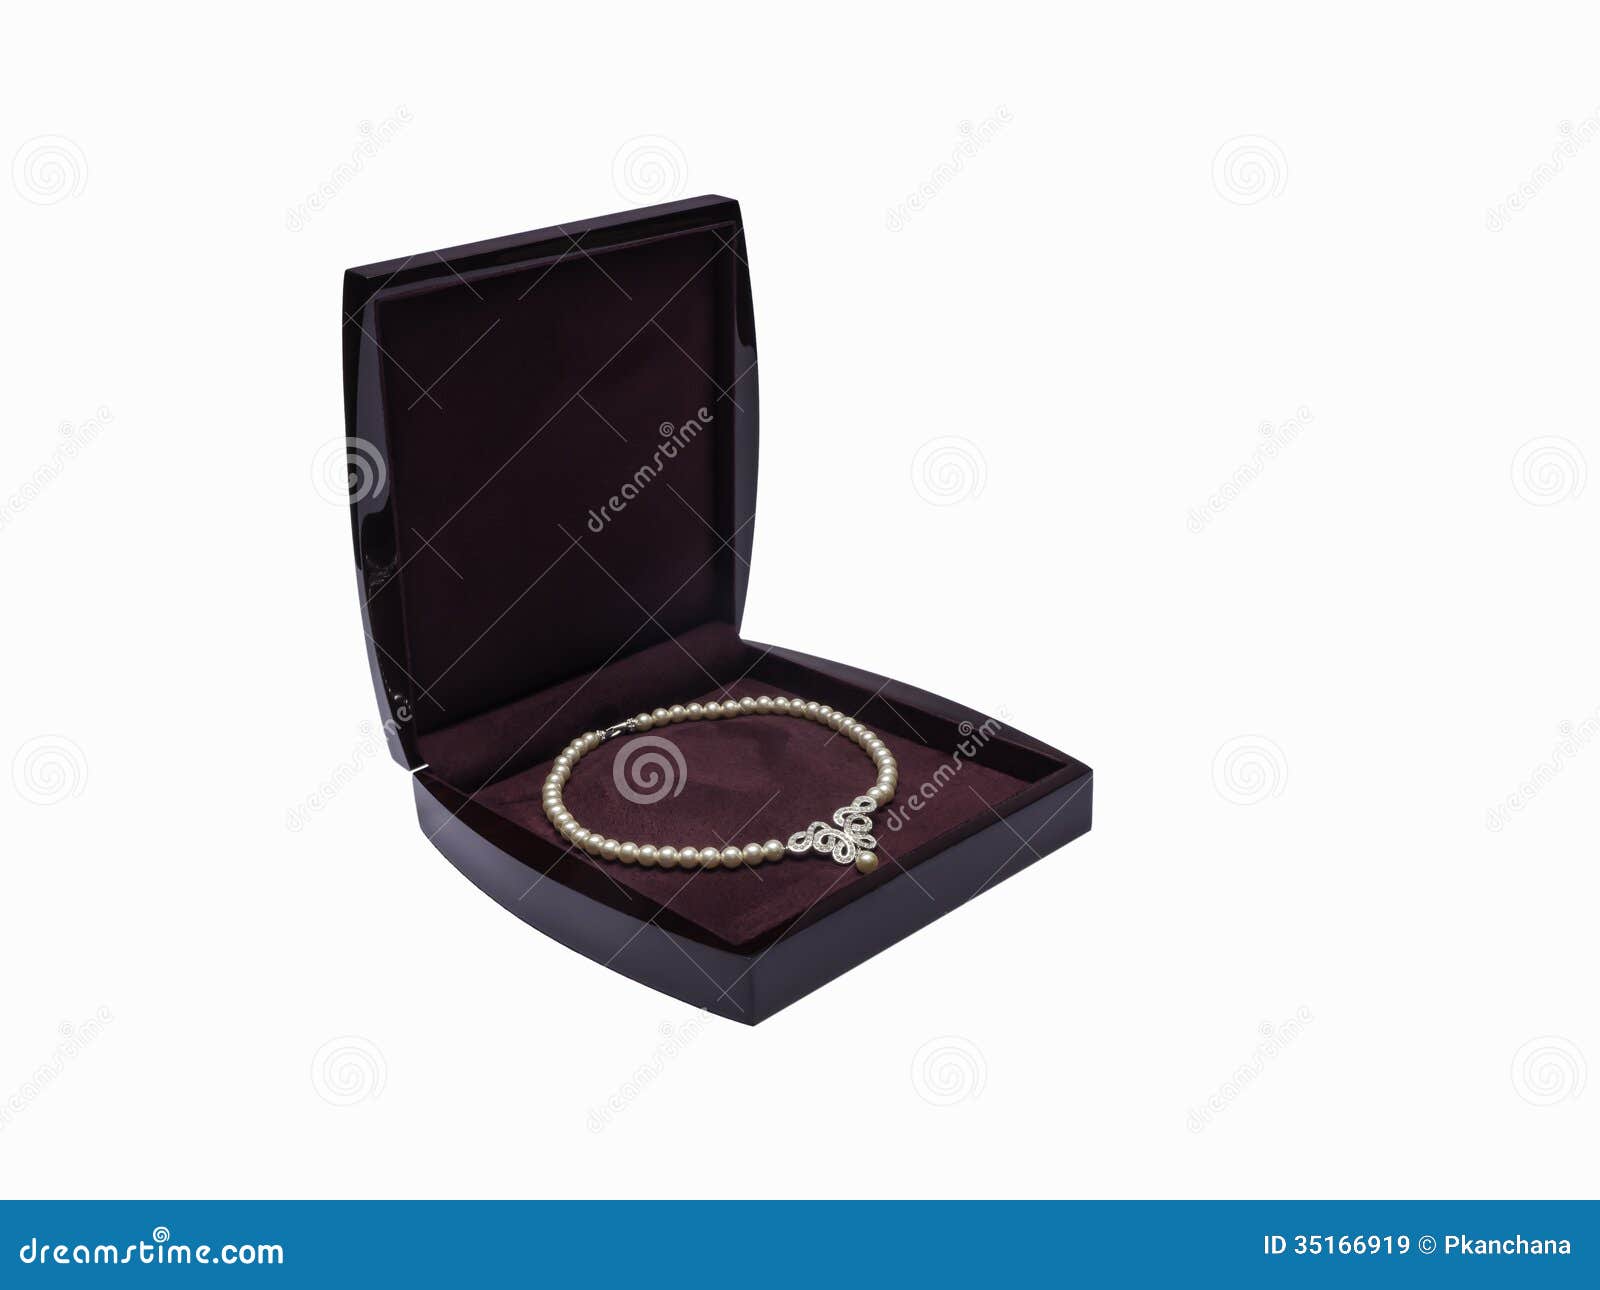 Wooden Jewelry Box Royalty Free Stock Images - Image: 35166919